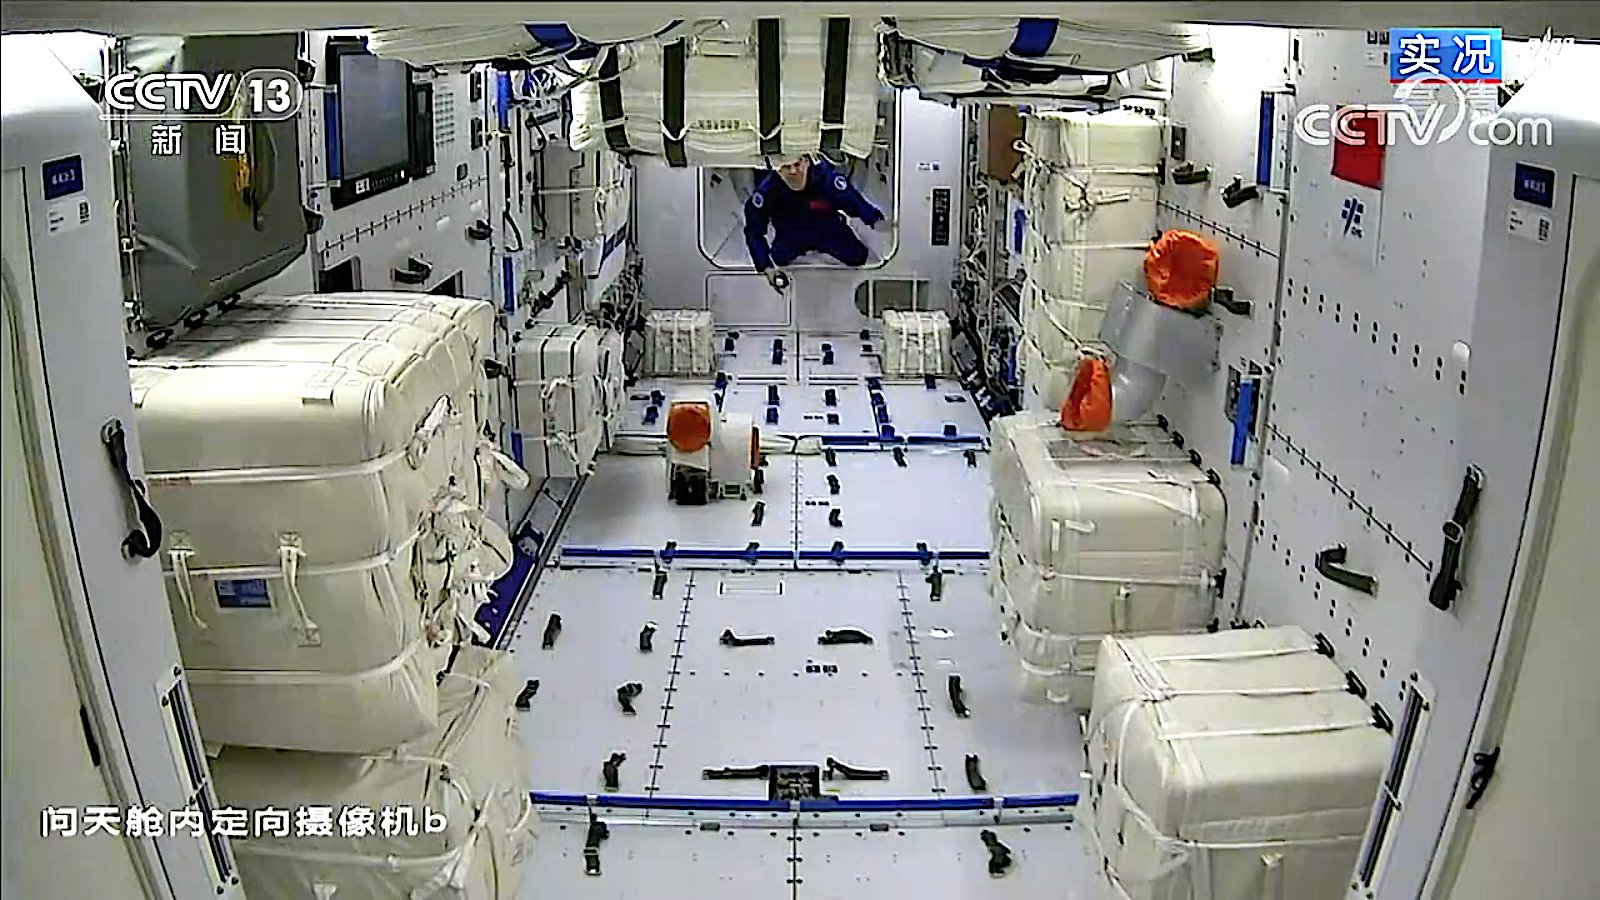 Chinese astronauts enter lab module after successfully docks with space station